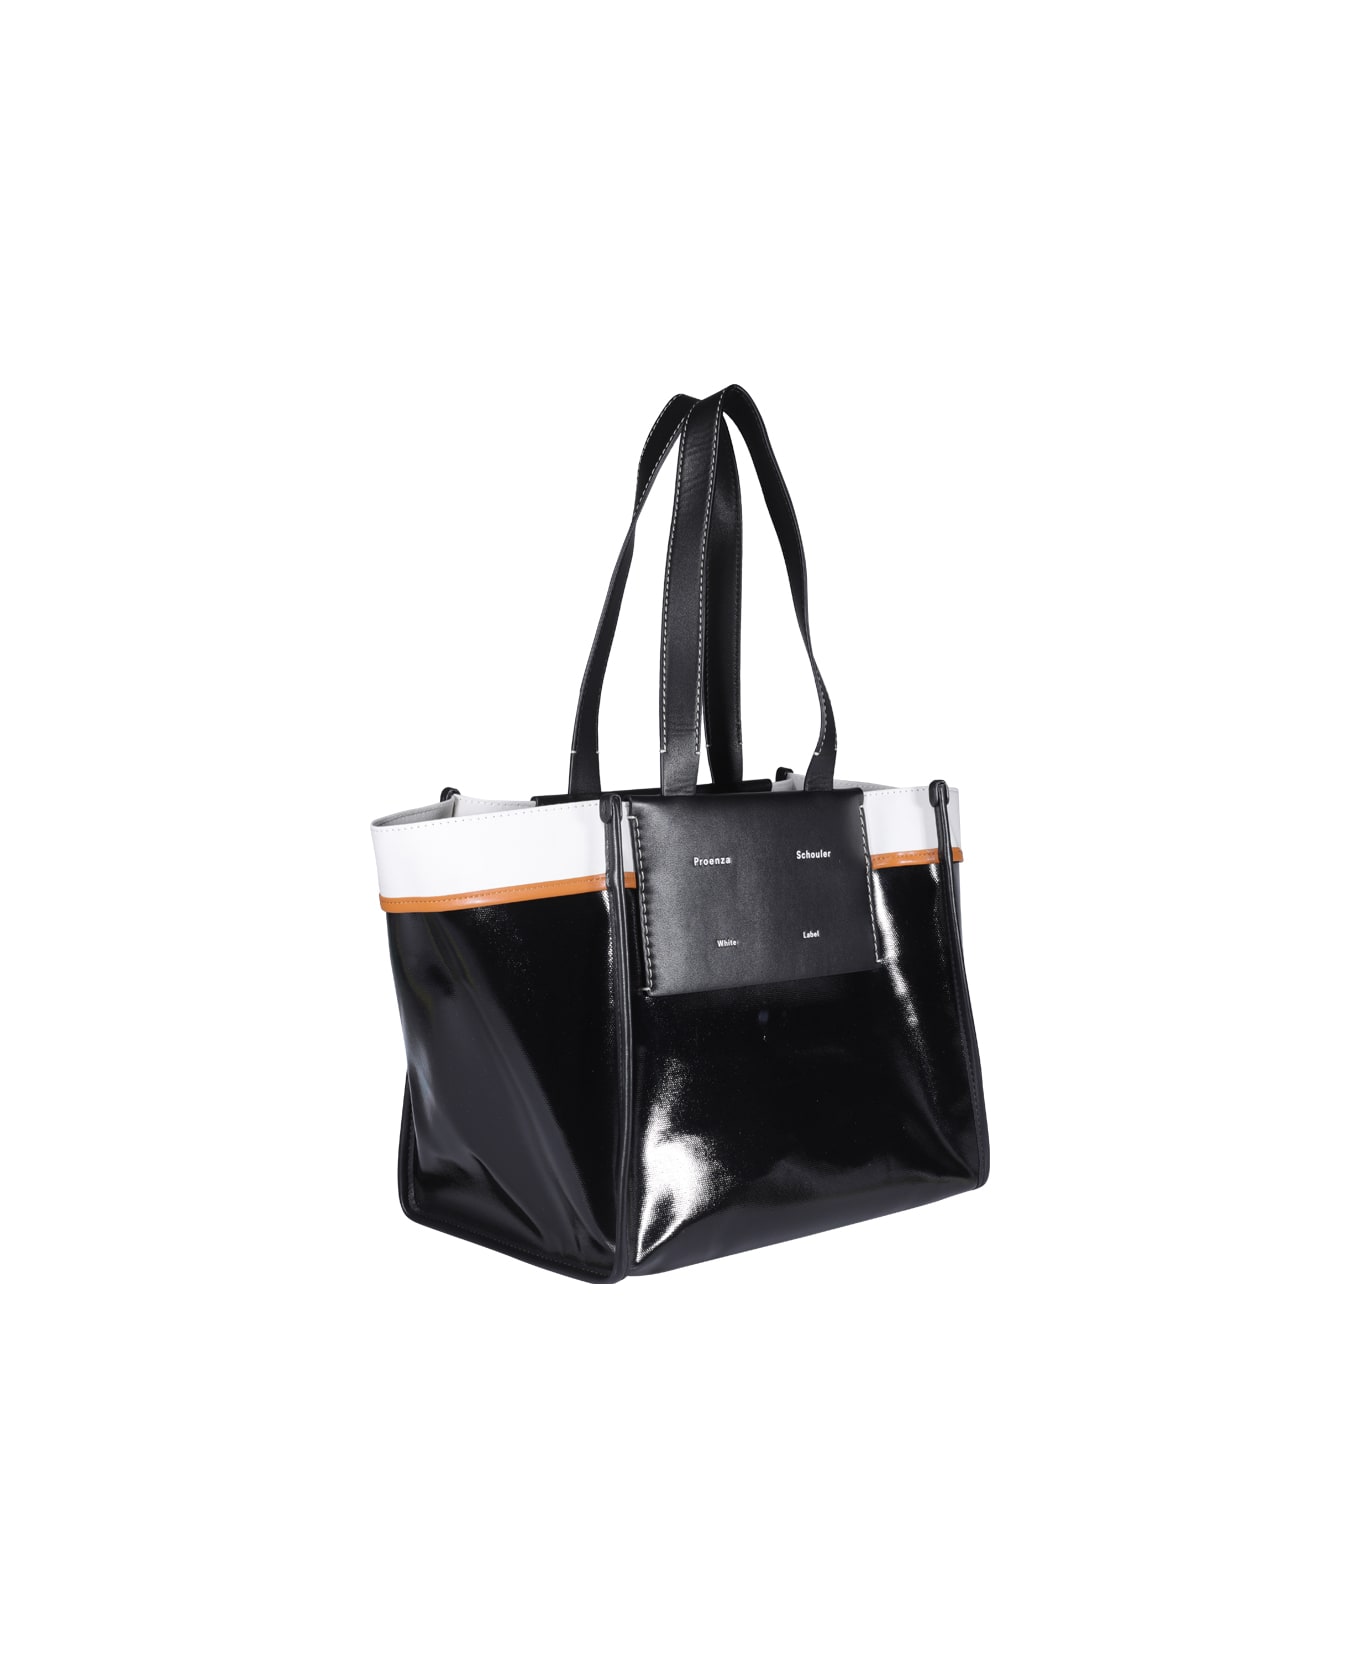 Proenza Schouler Large Morris Coated Canvas Tote - BLACK/WHITE トートバッグ